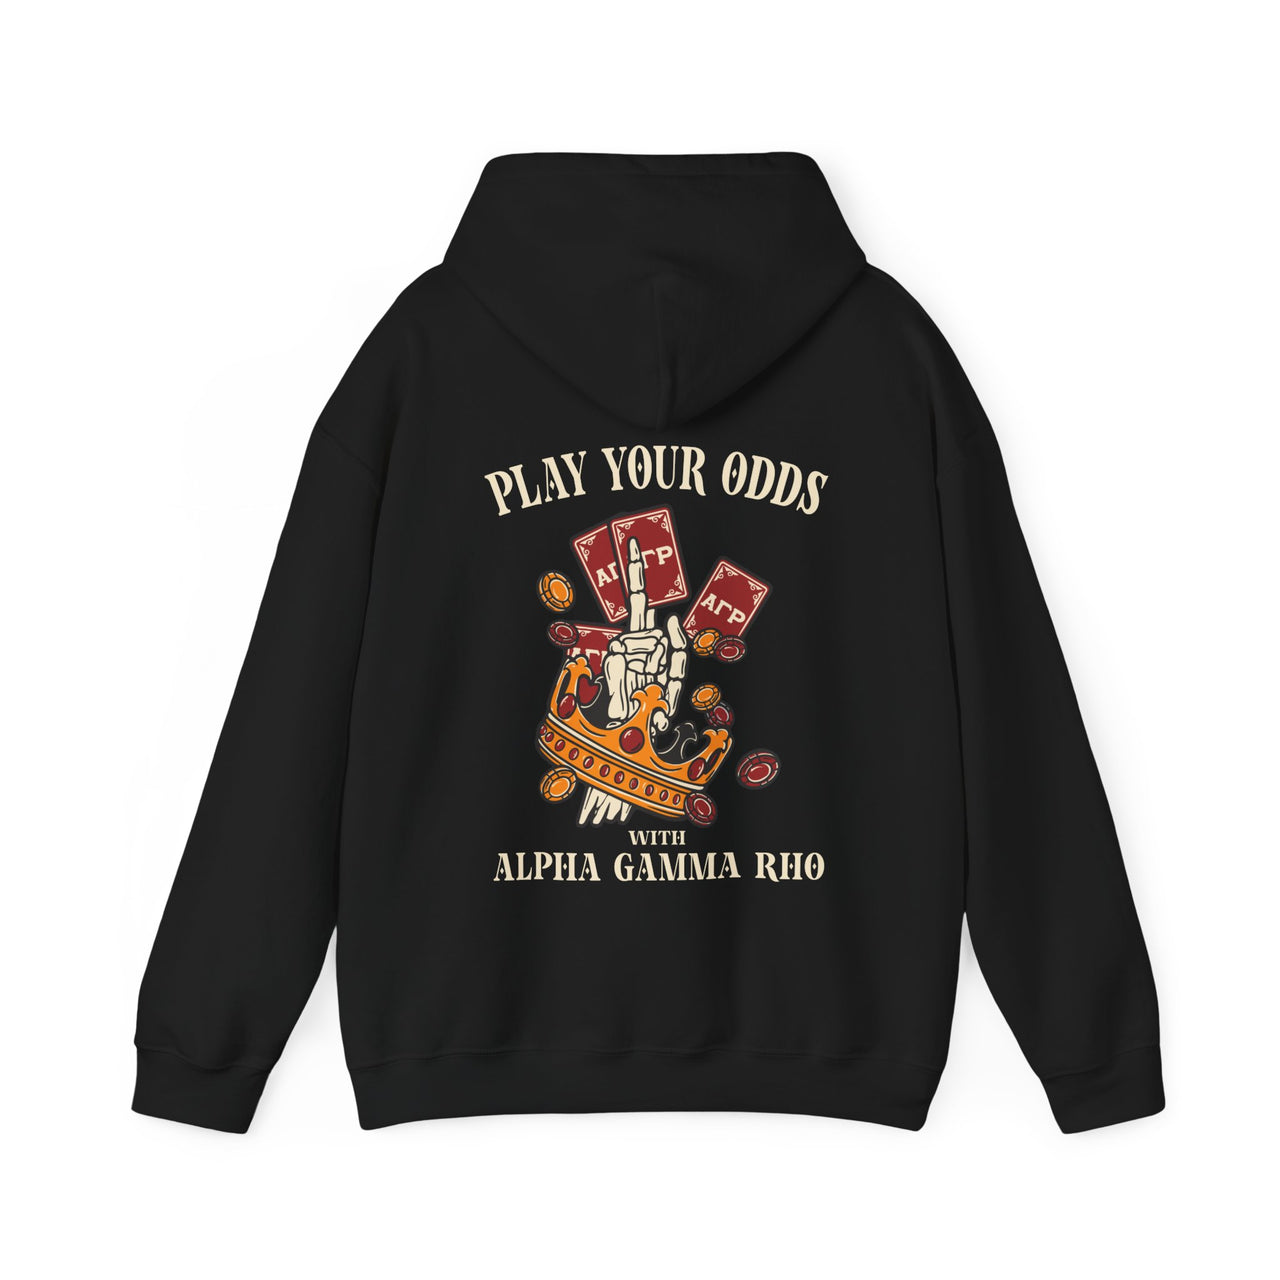 Alpha Gamma Rho Graphic Hoodie | Play Your Odds